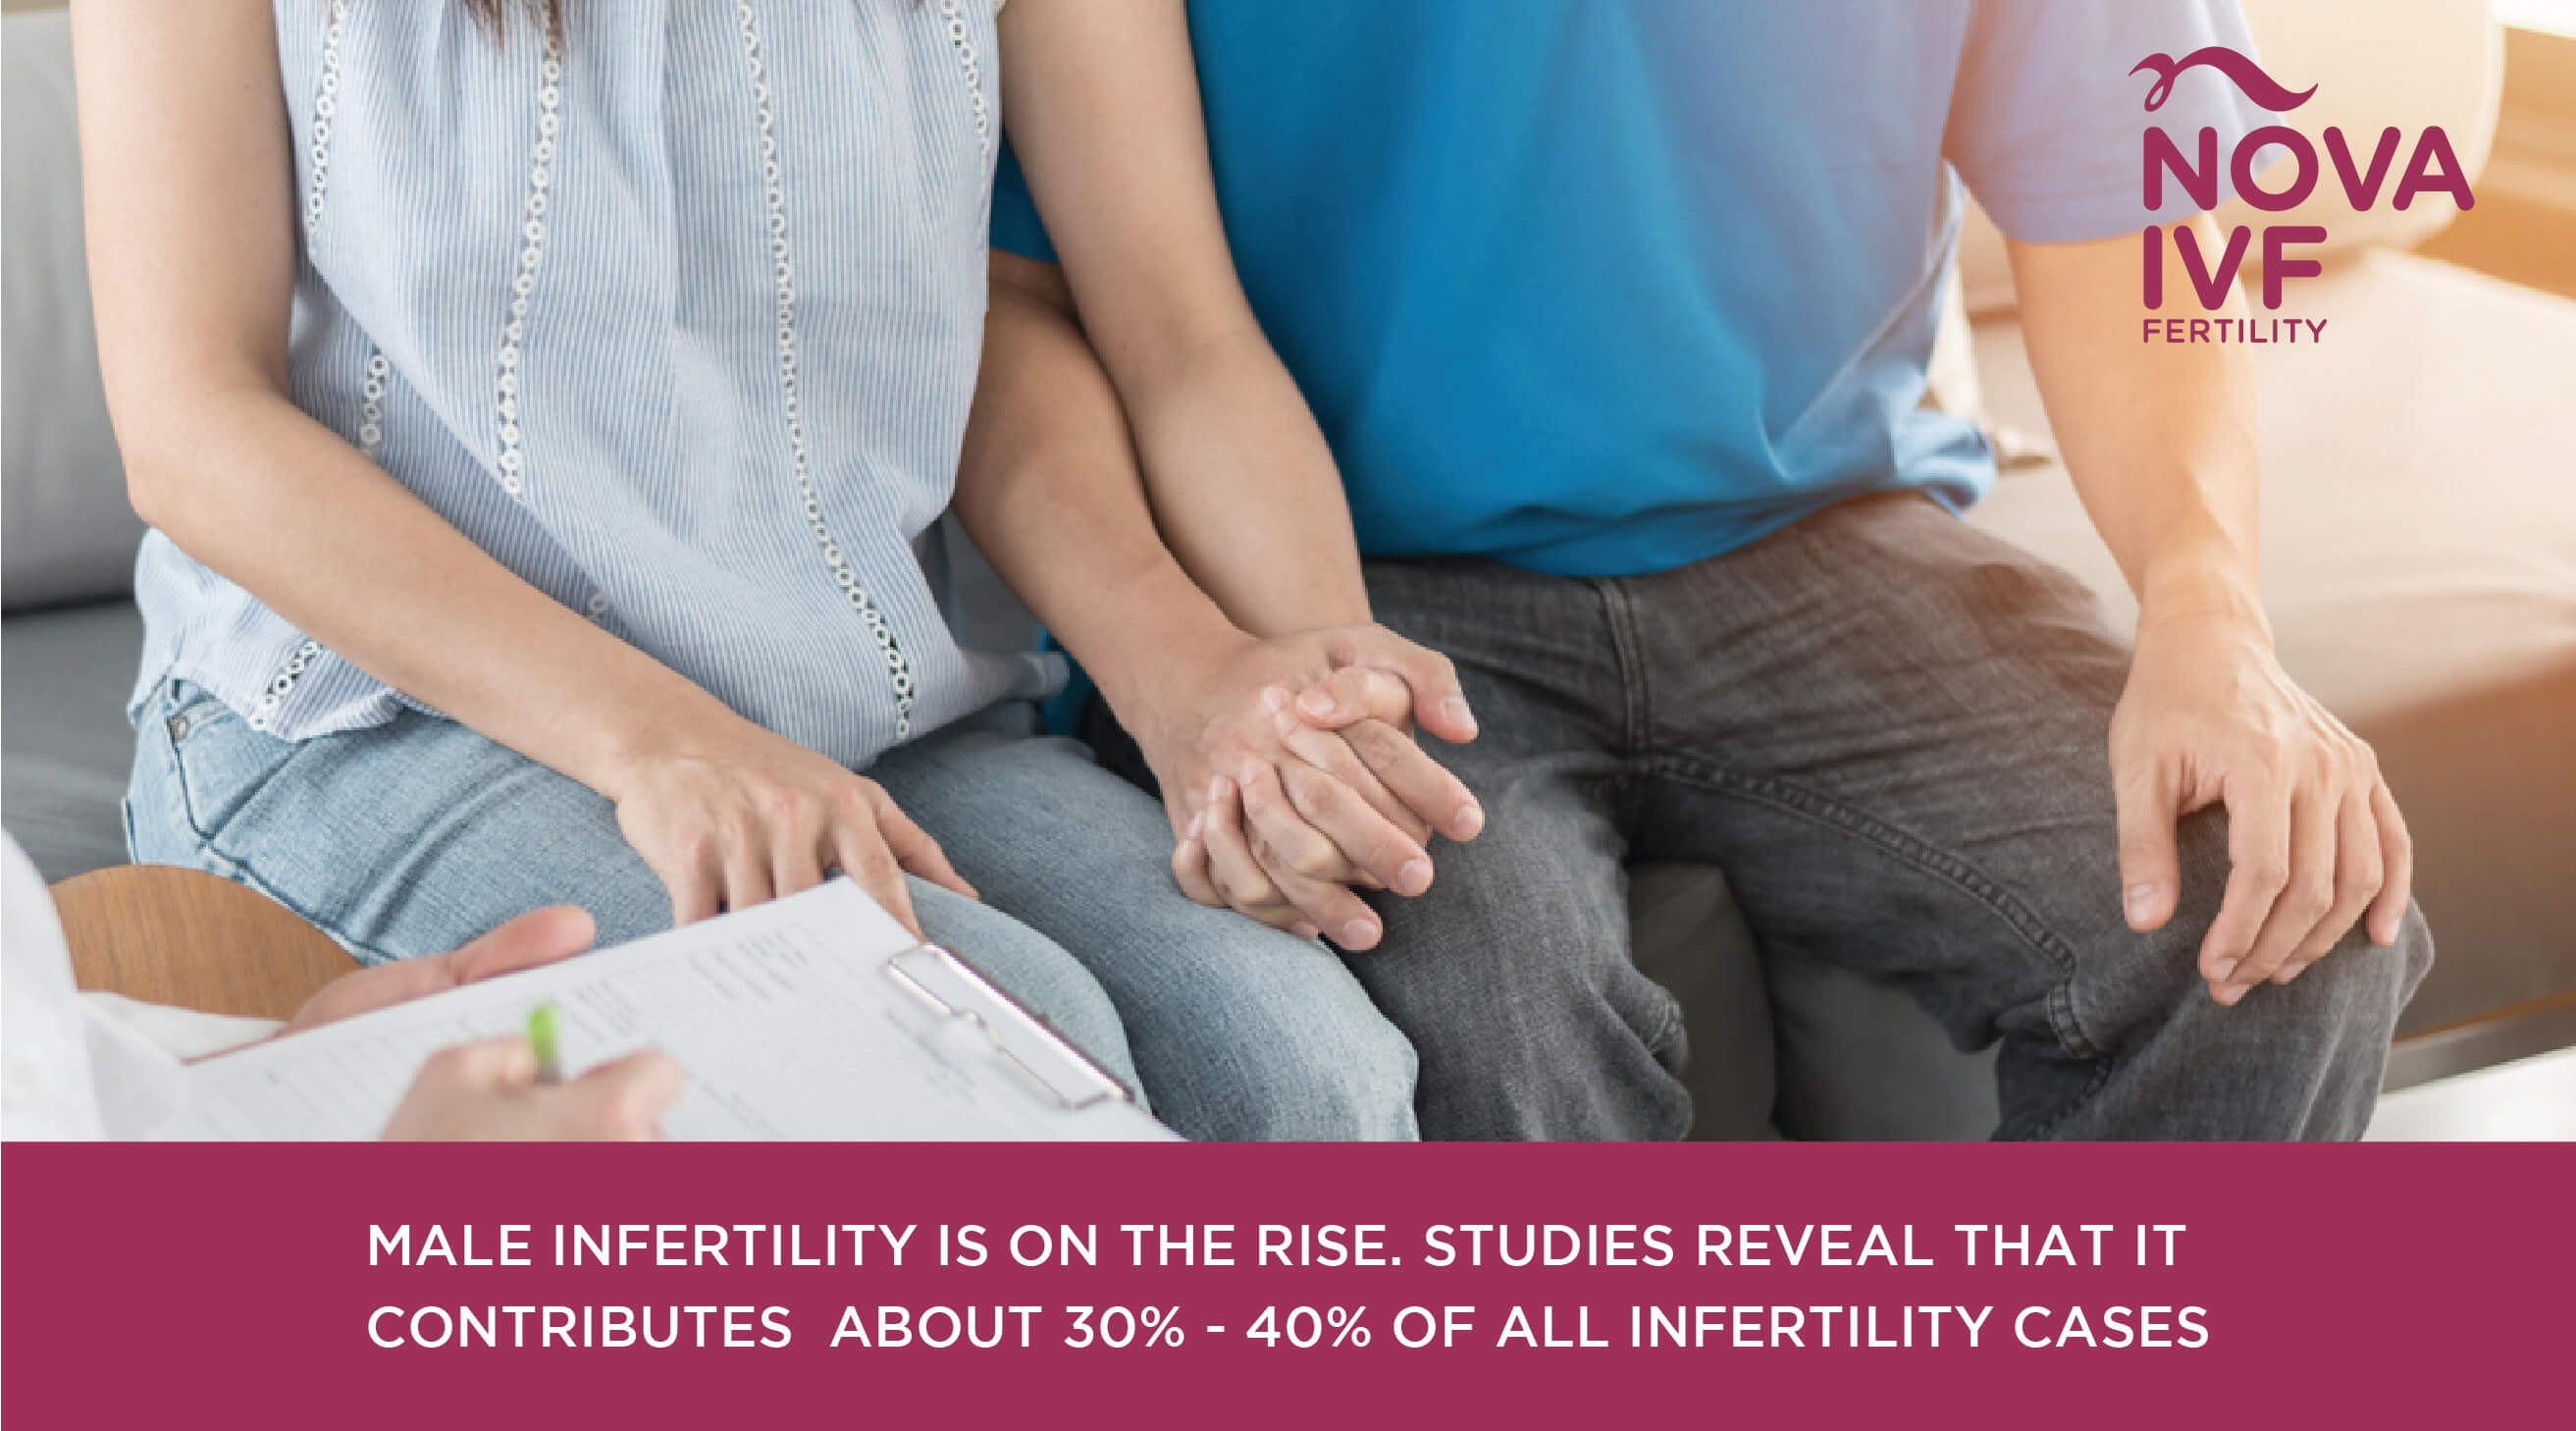 What Are The Common Symptoms Of Infertility